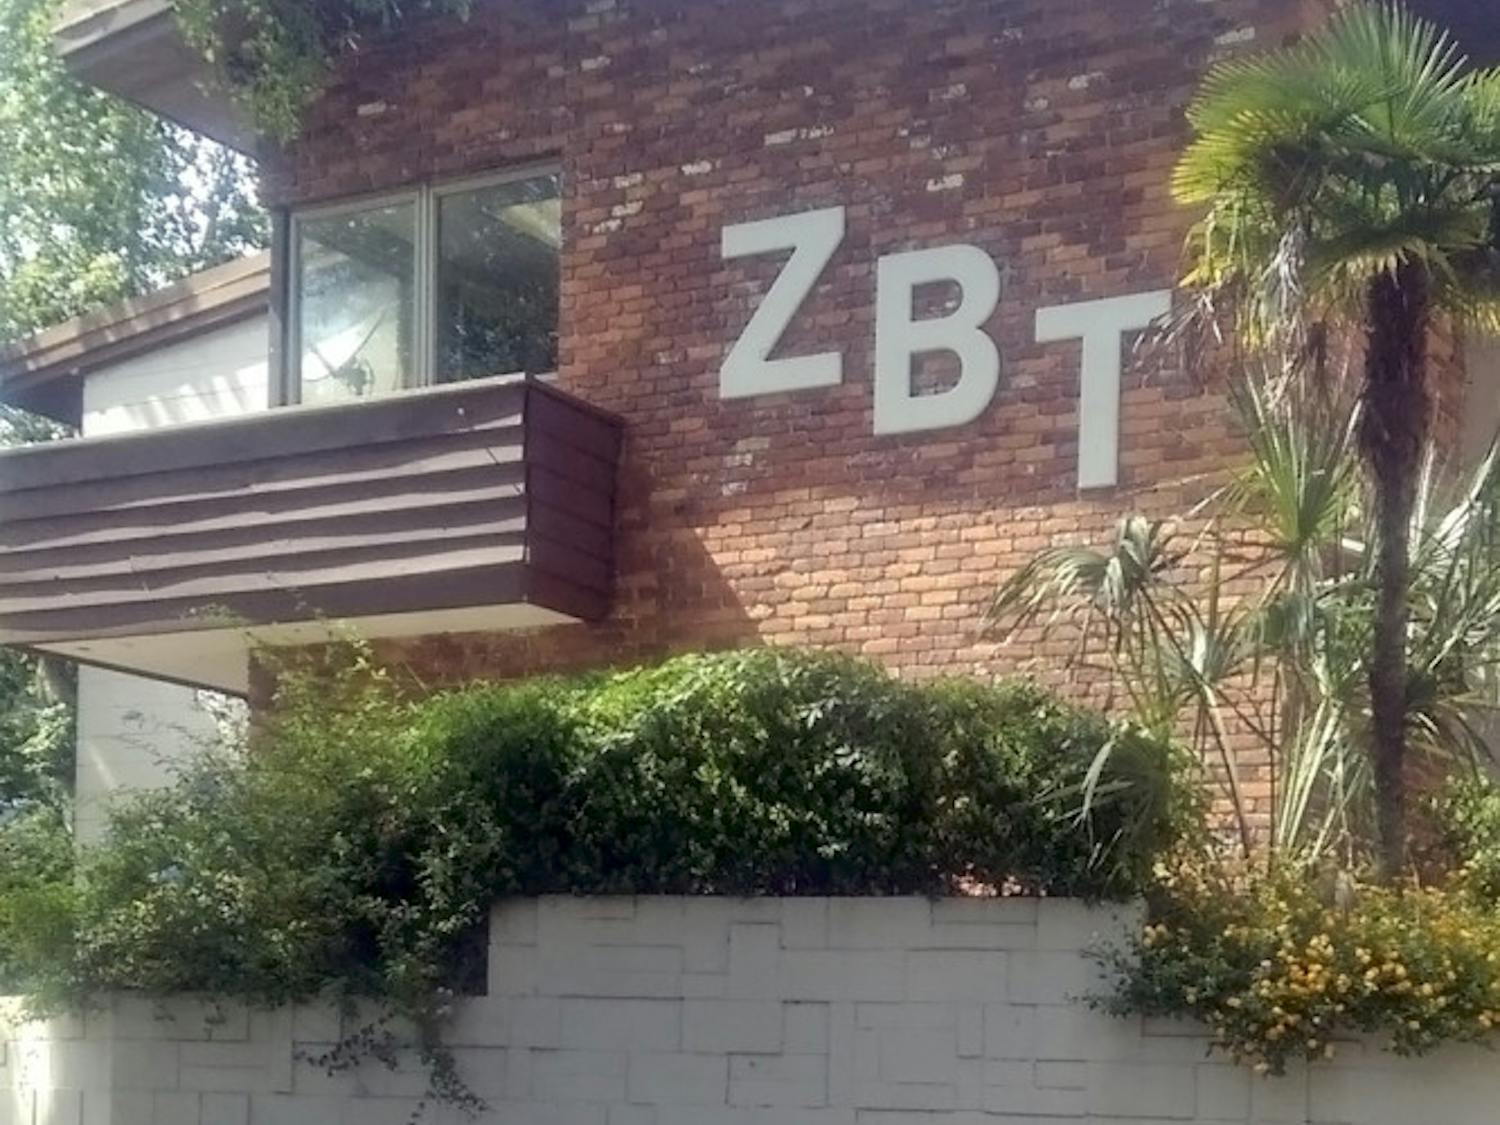 Pictured is the Zeta Beta Tau fraternity house on Fraternity Drive. In late April, UF shut down the local ZBT chapter after launching a misconduct investigation as a result of an incident in Panama City Beach involving members of the fraternity.